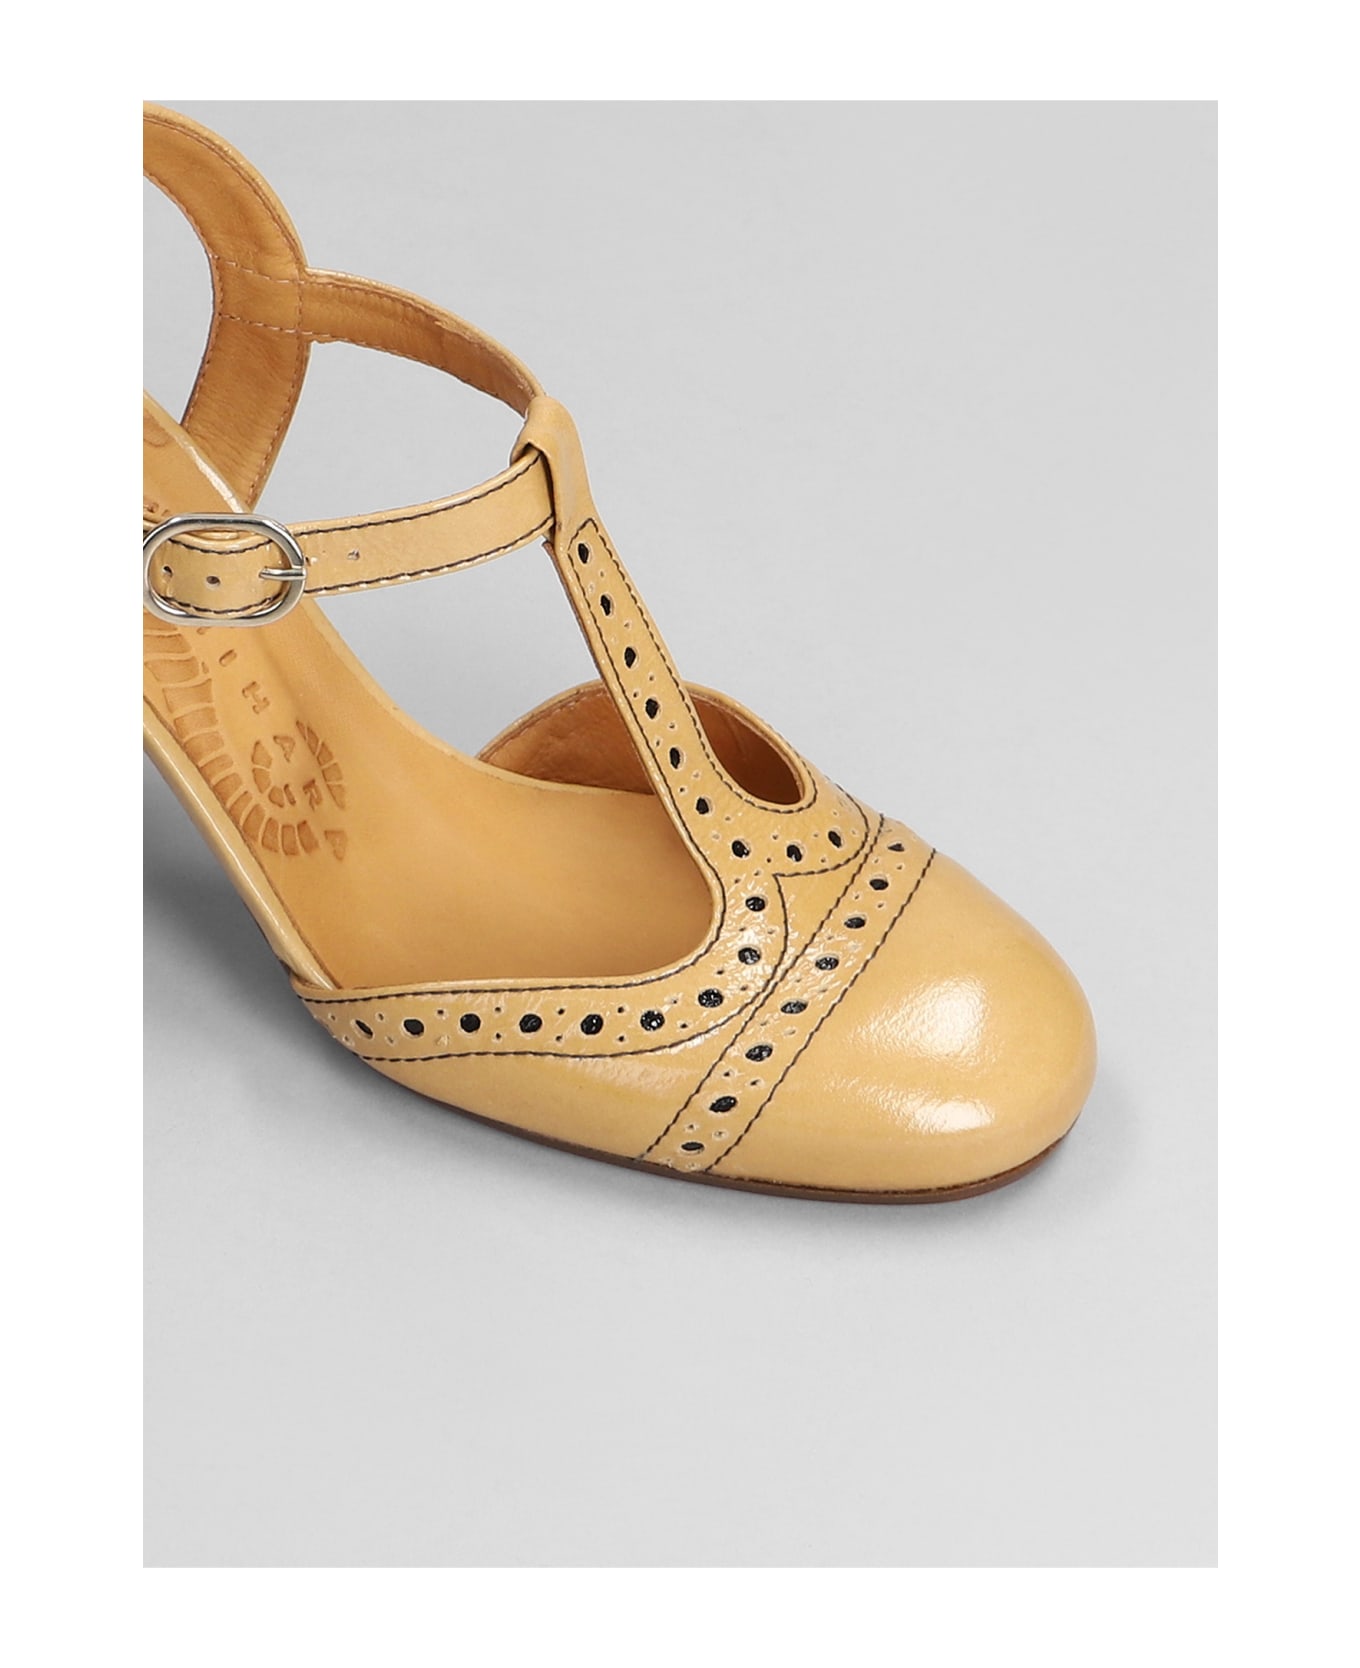 Chie Mihara Mira Pumps In Beige Leather - beige ハイヒール